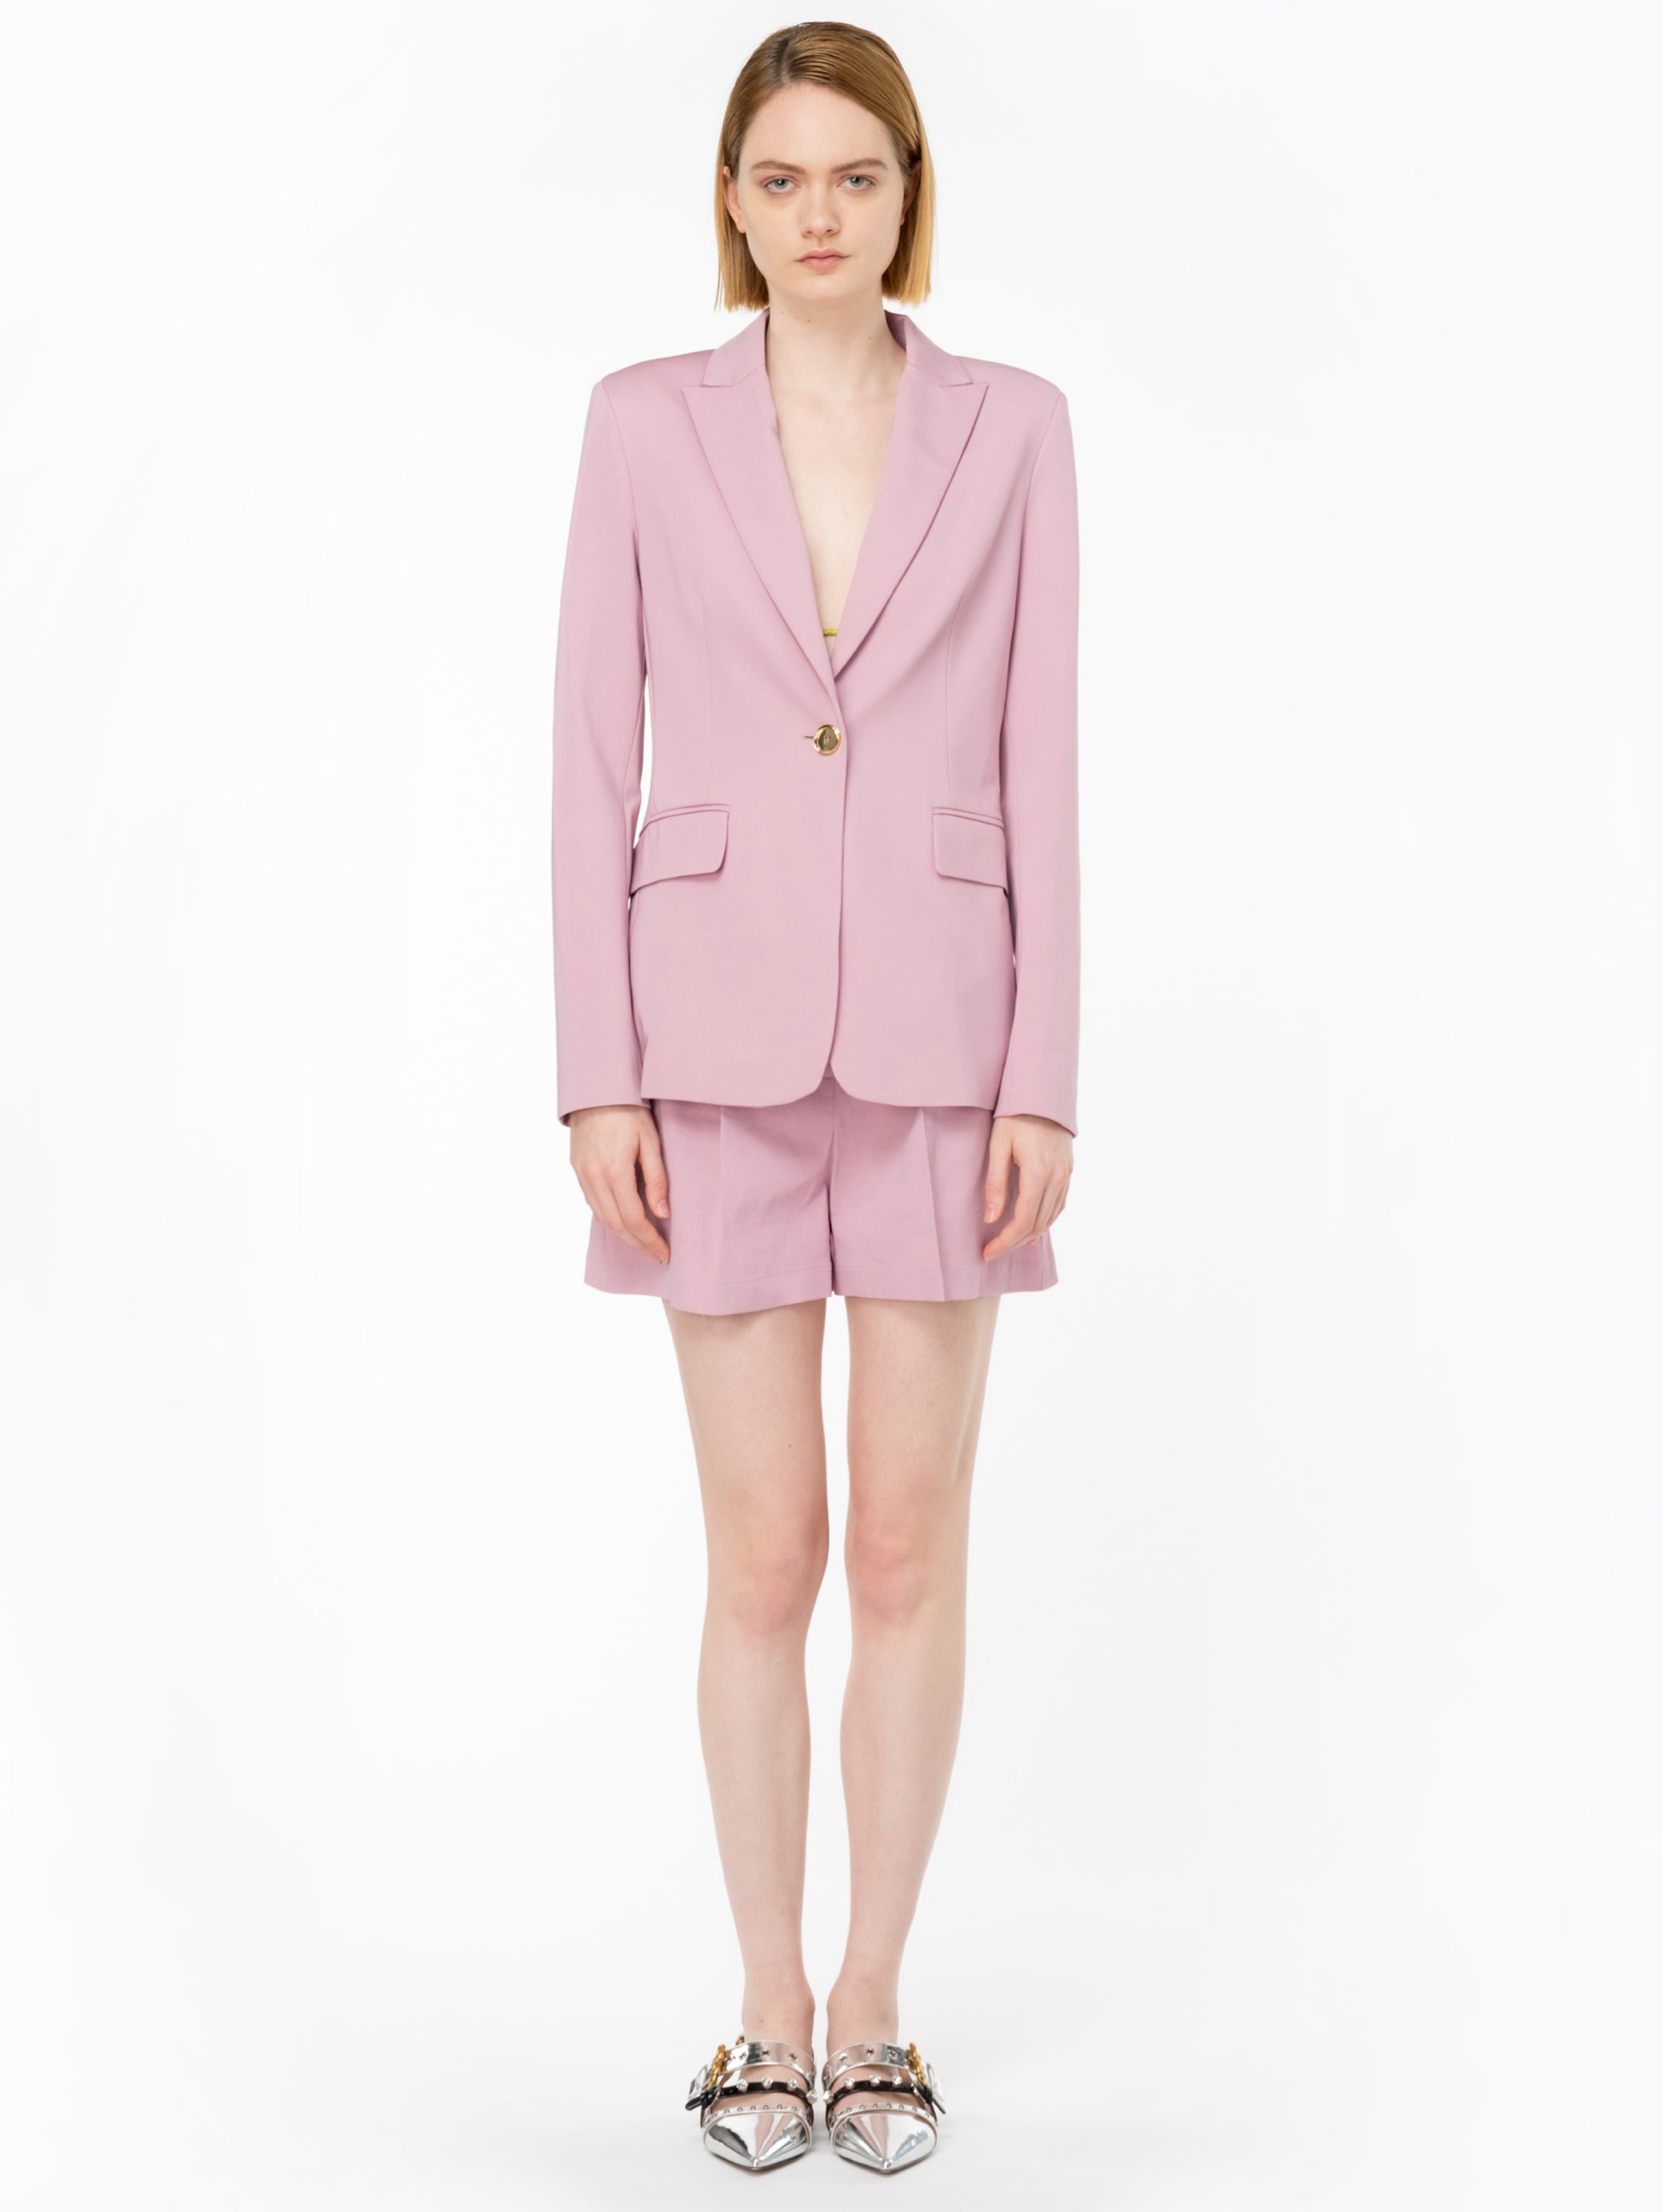 Single-breasted blazer in orchid fabric stitch